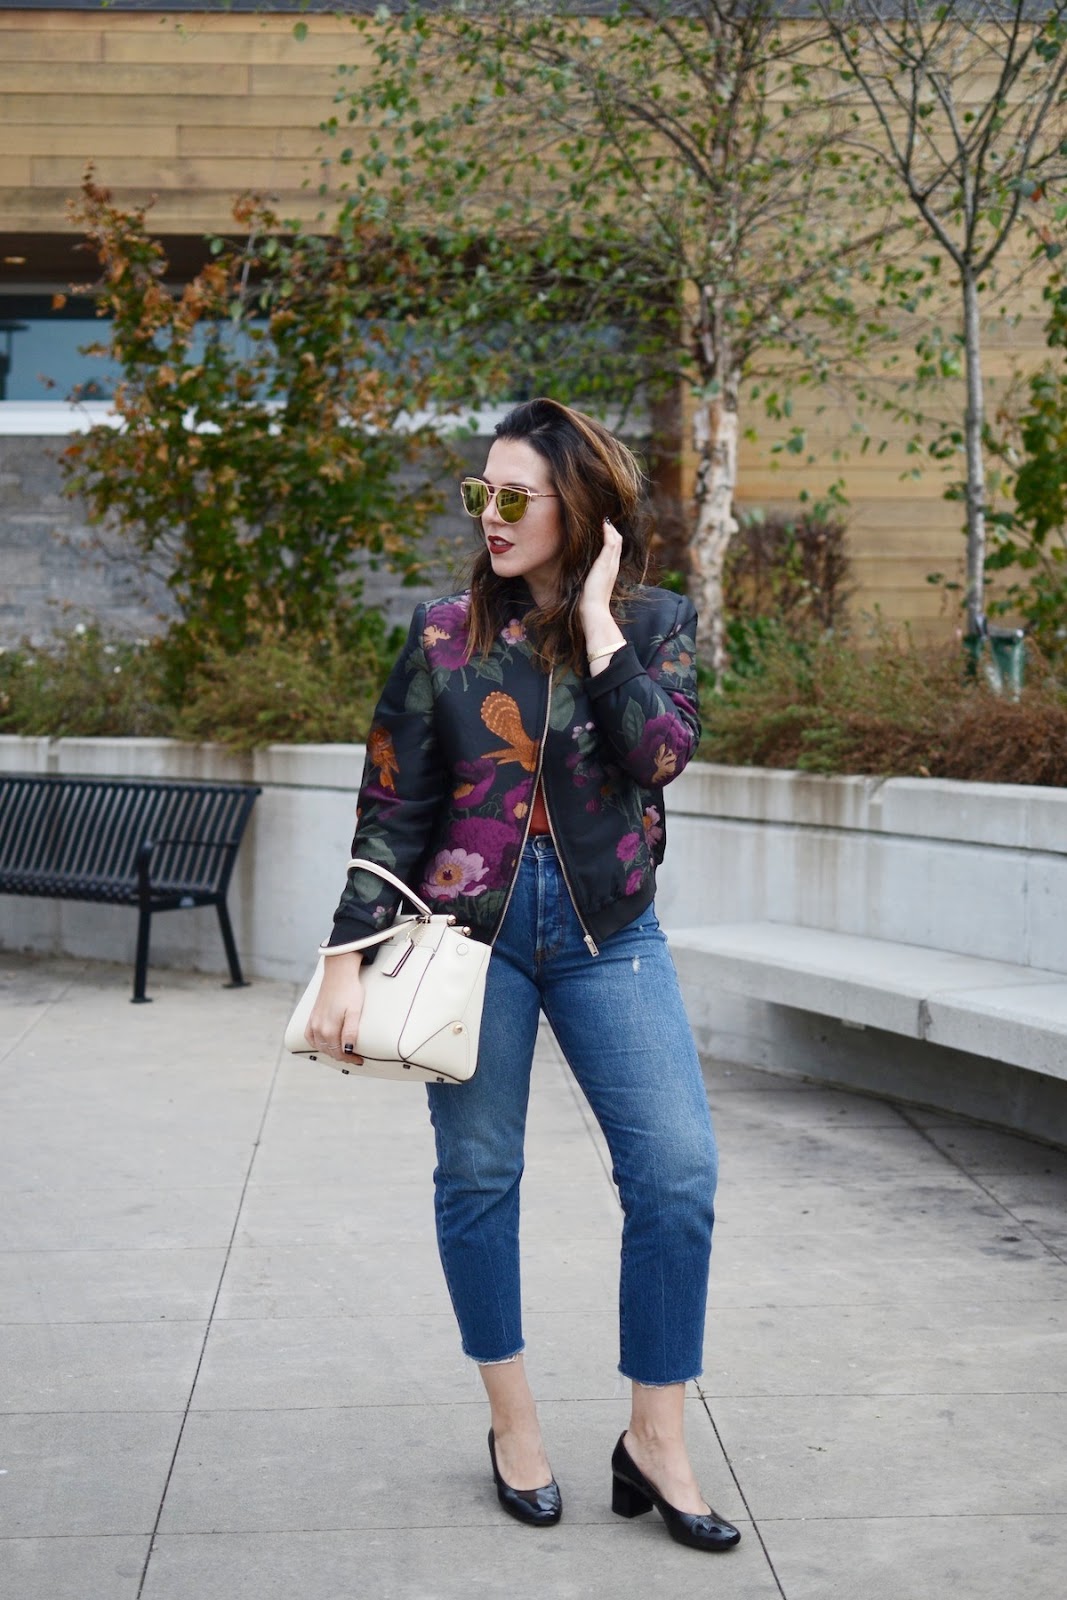 Le Chateau embroidered bomber jacket levis wedgie jeans vancouver fashion blogger aleesha harris